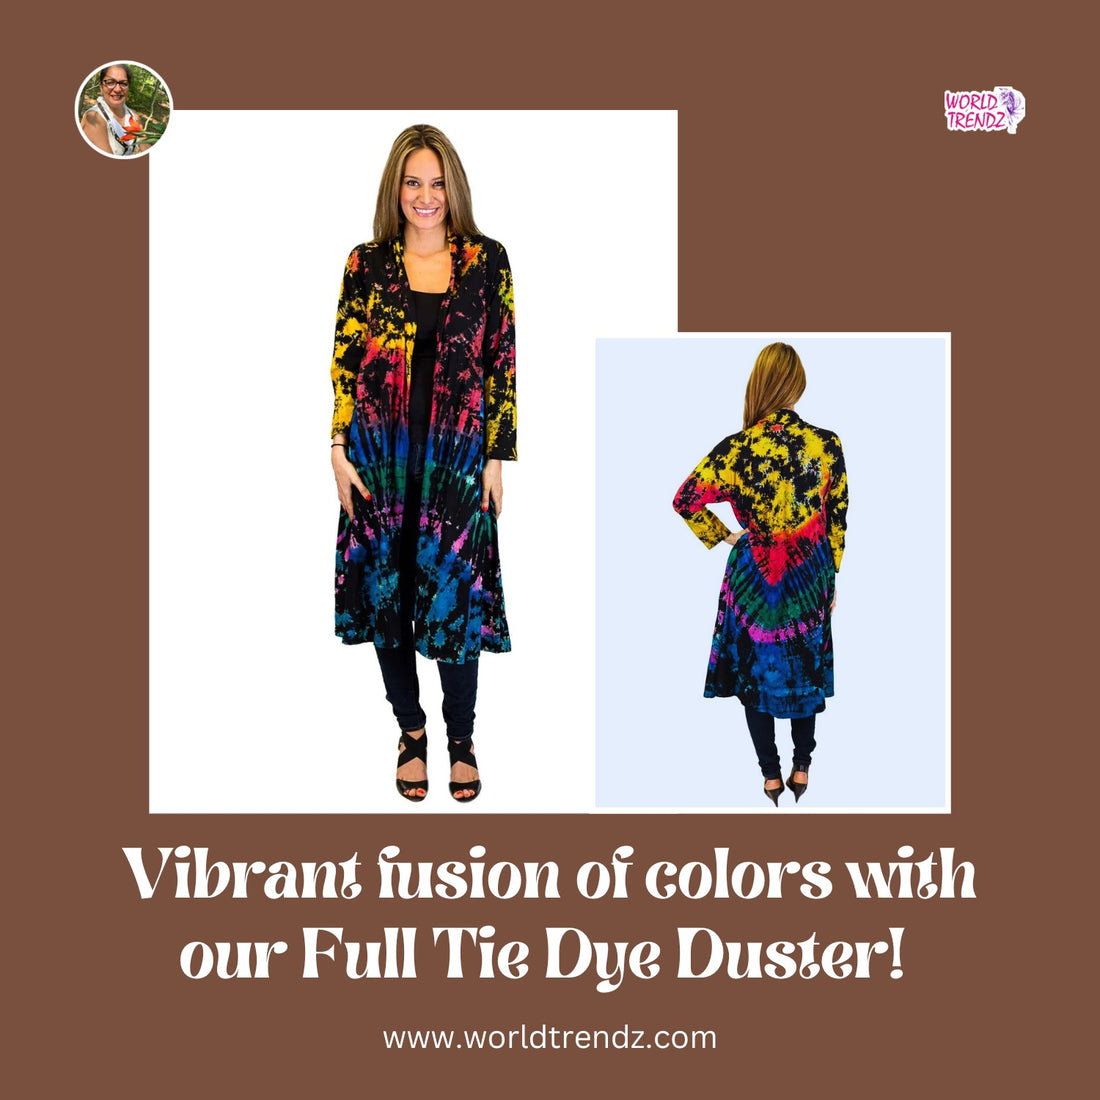 Make a Bold Fashion Statement with the Full Tie Dye Duster With Pockets: Black Rainbow - A Fashion Game-Changer!